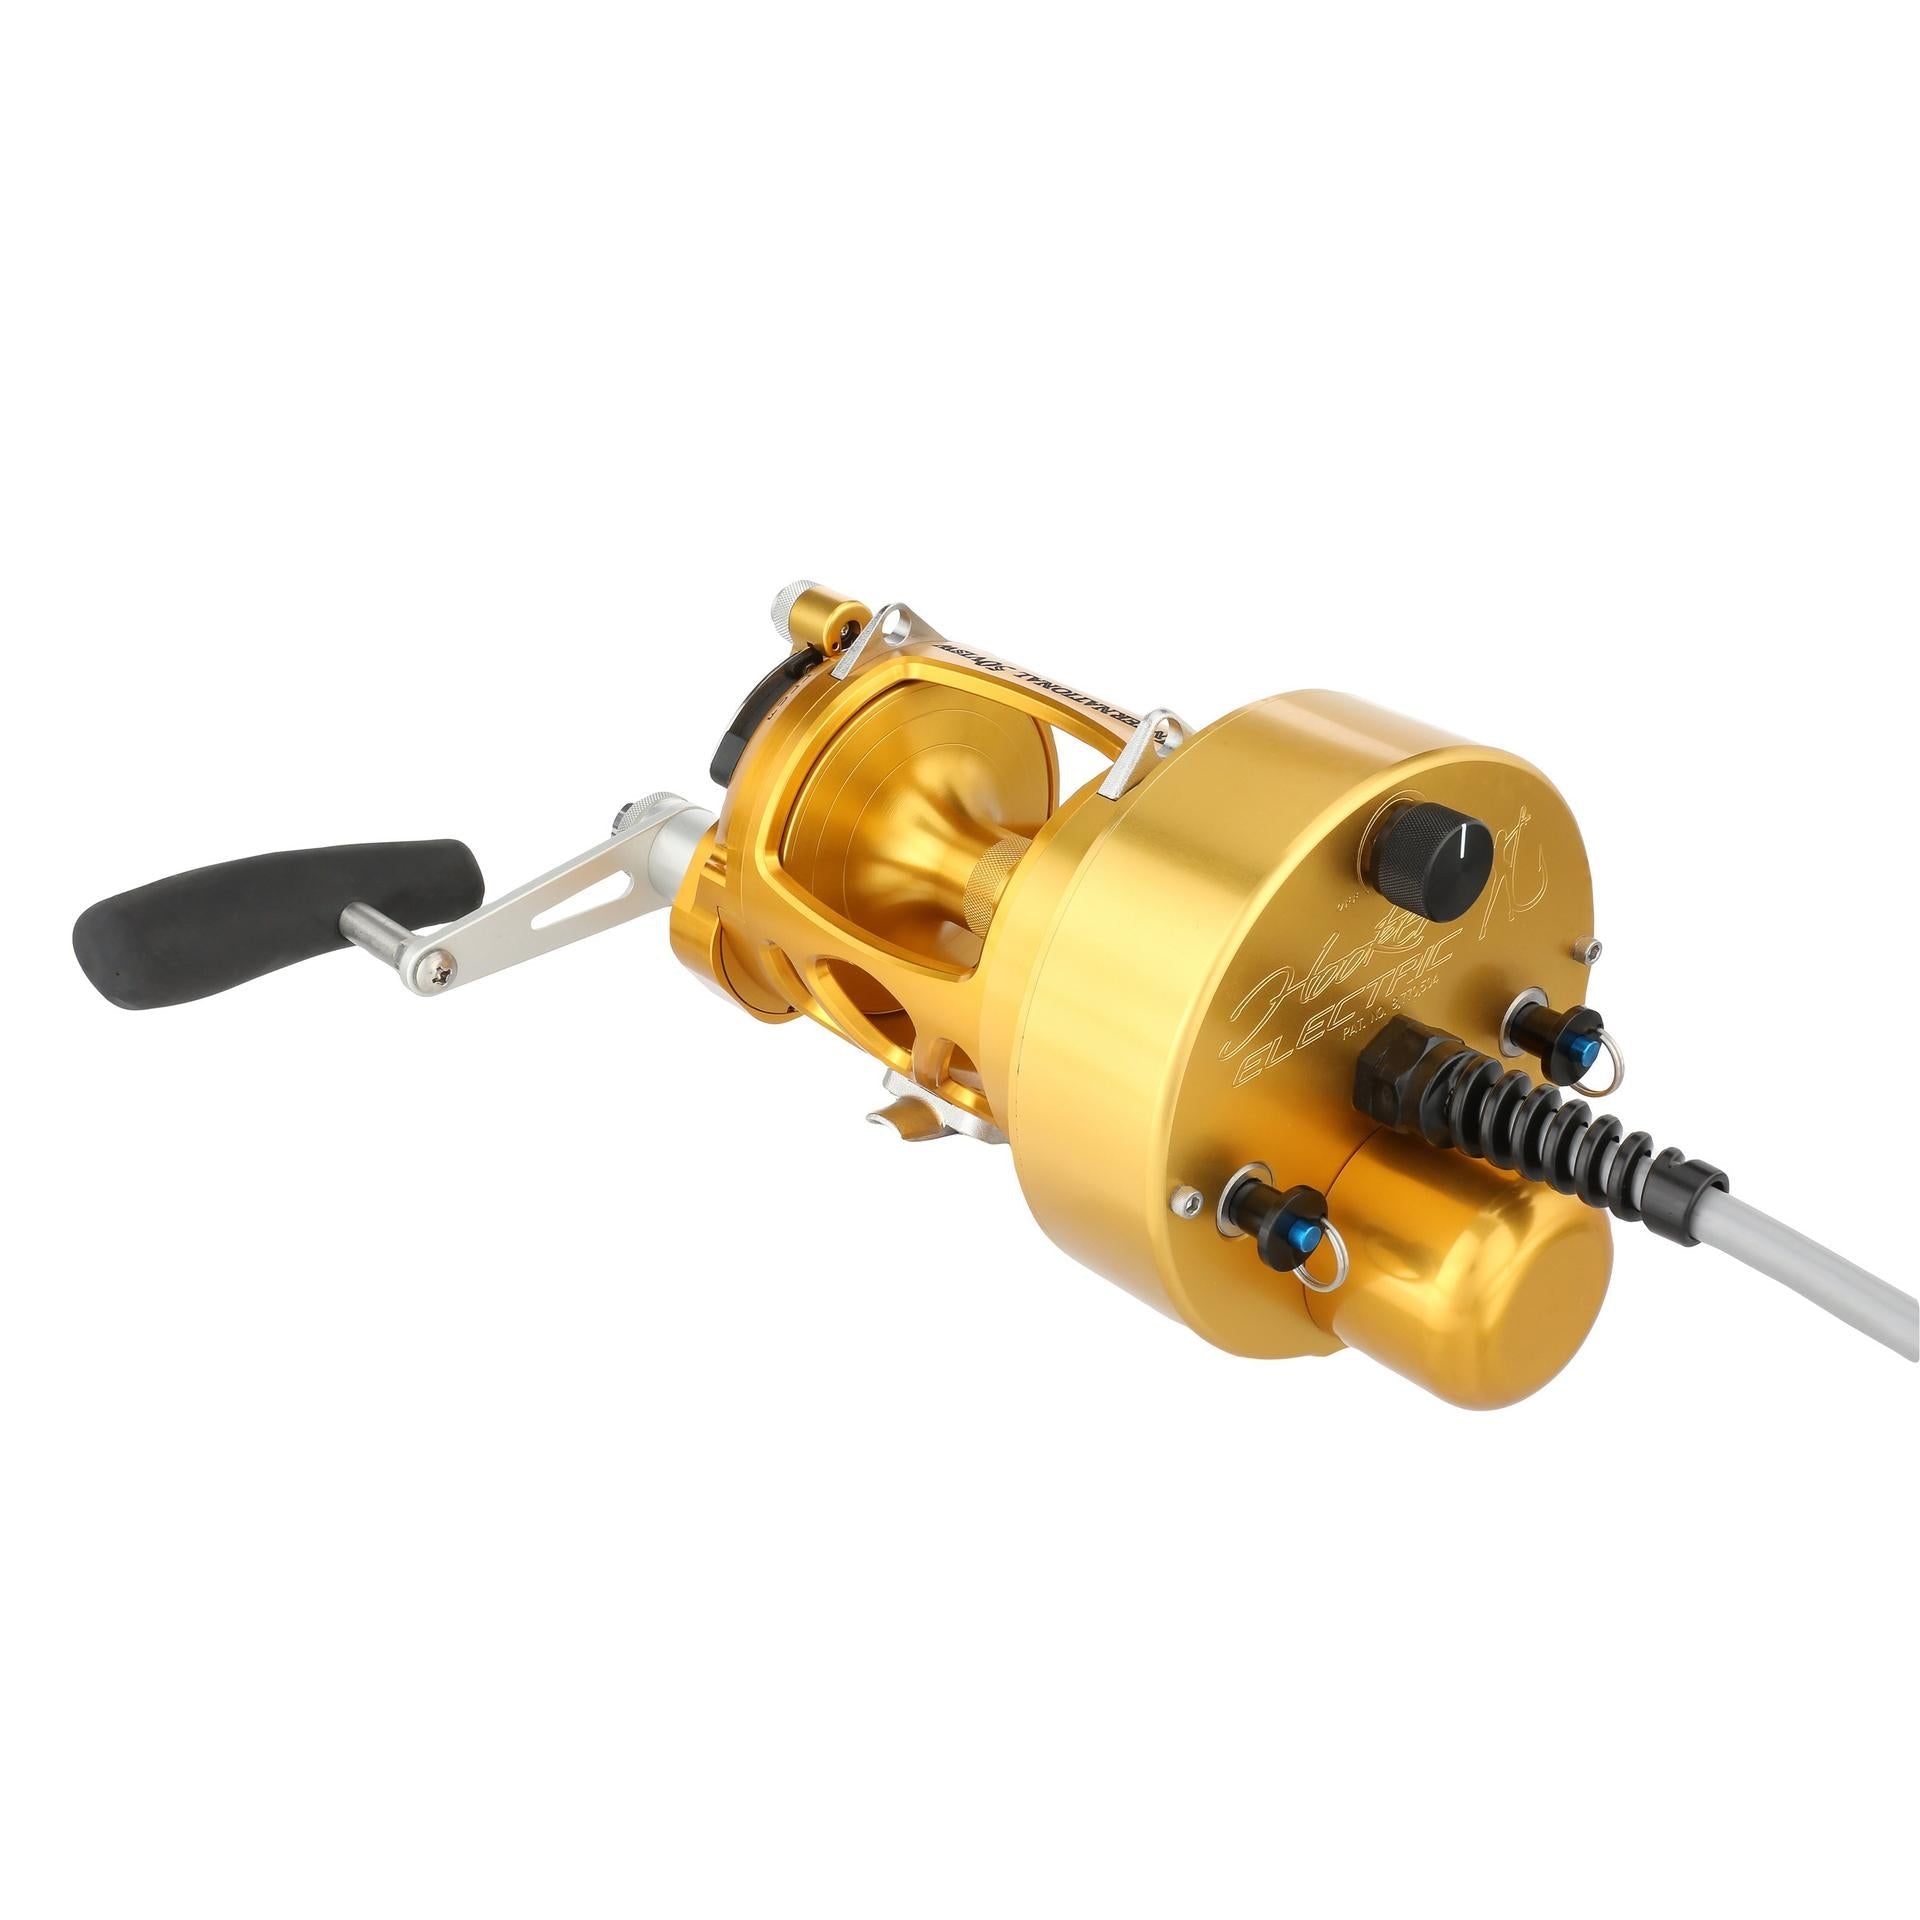 Treat yourself to one of the best reels on the market! The Hooker Electric Penn  International 80VISW is available at Tuppen's today! Pe